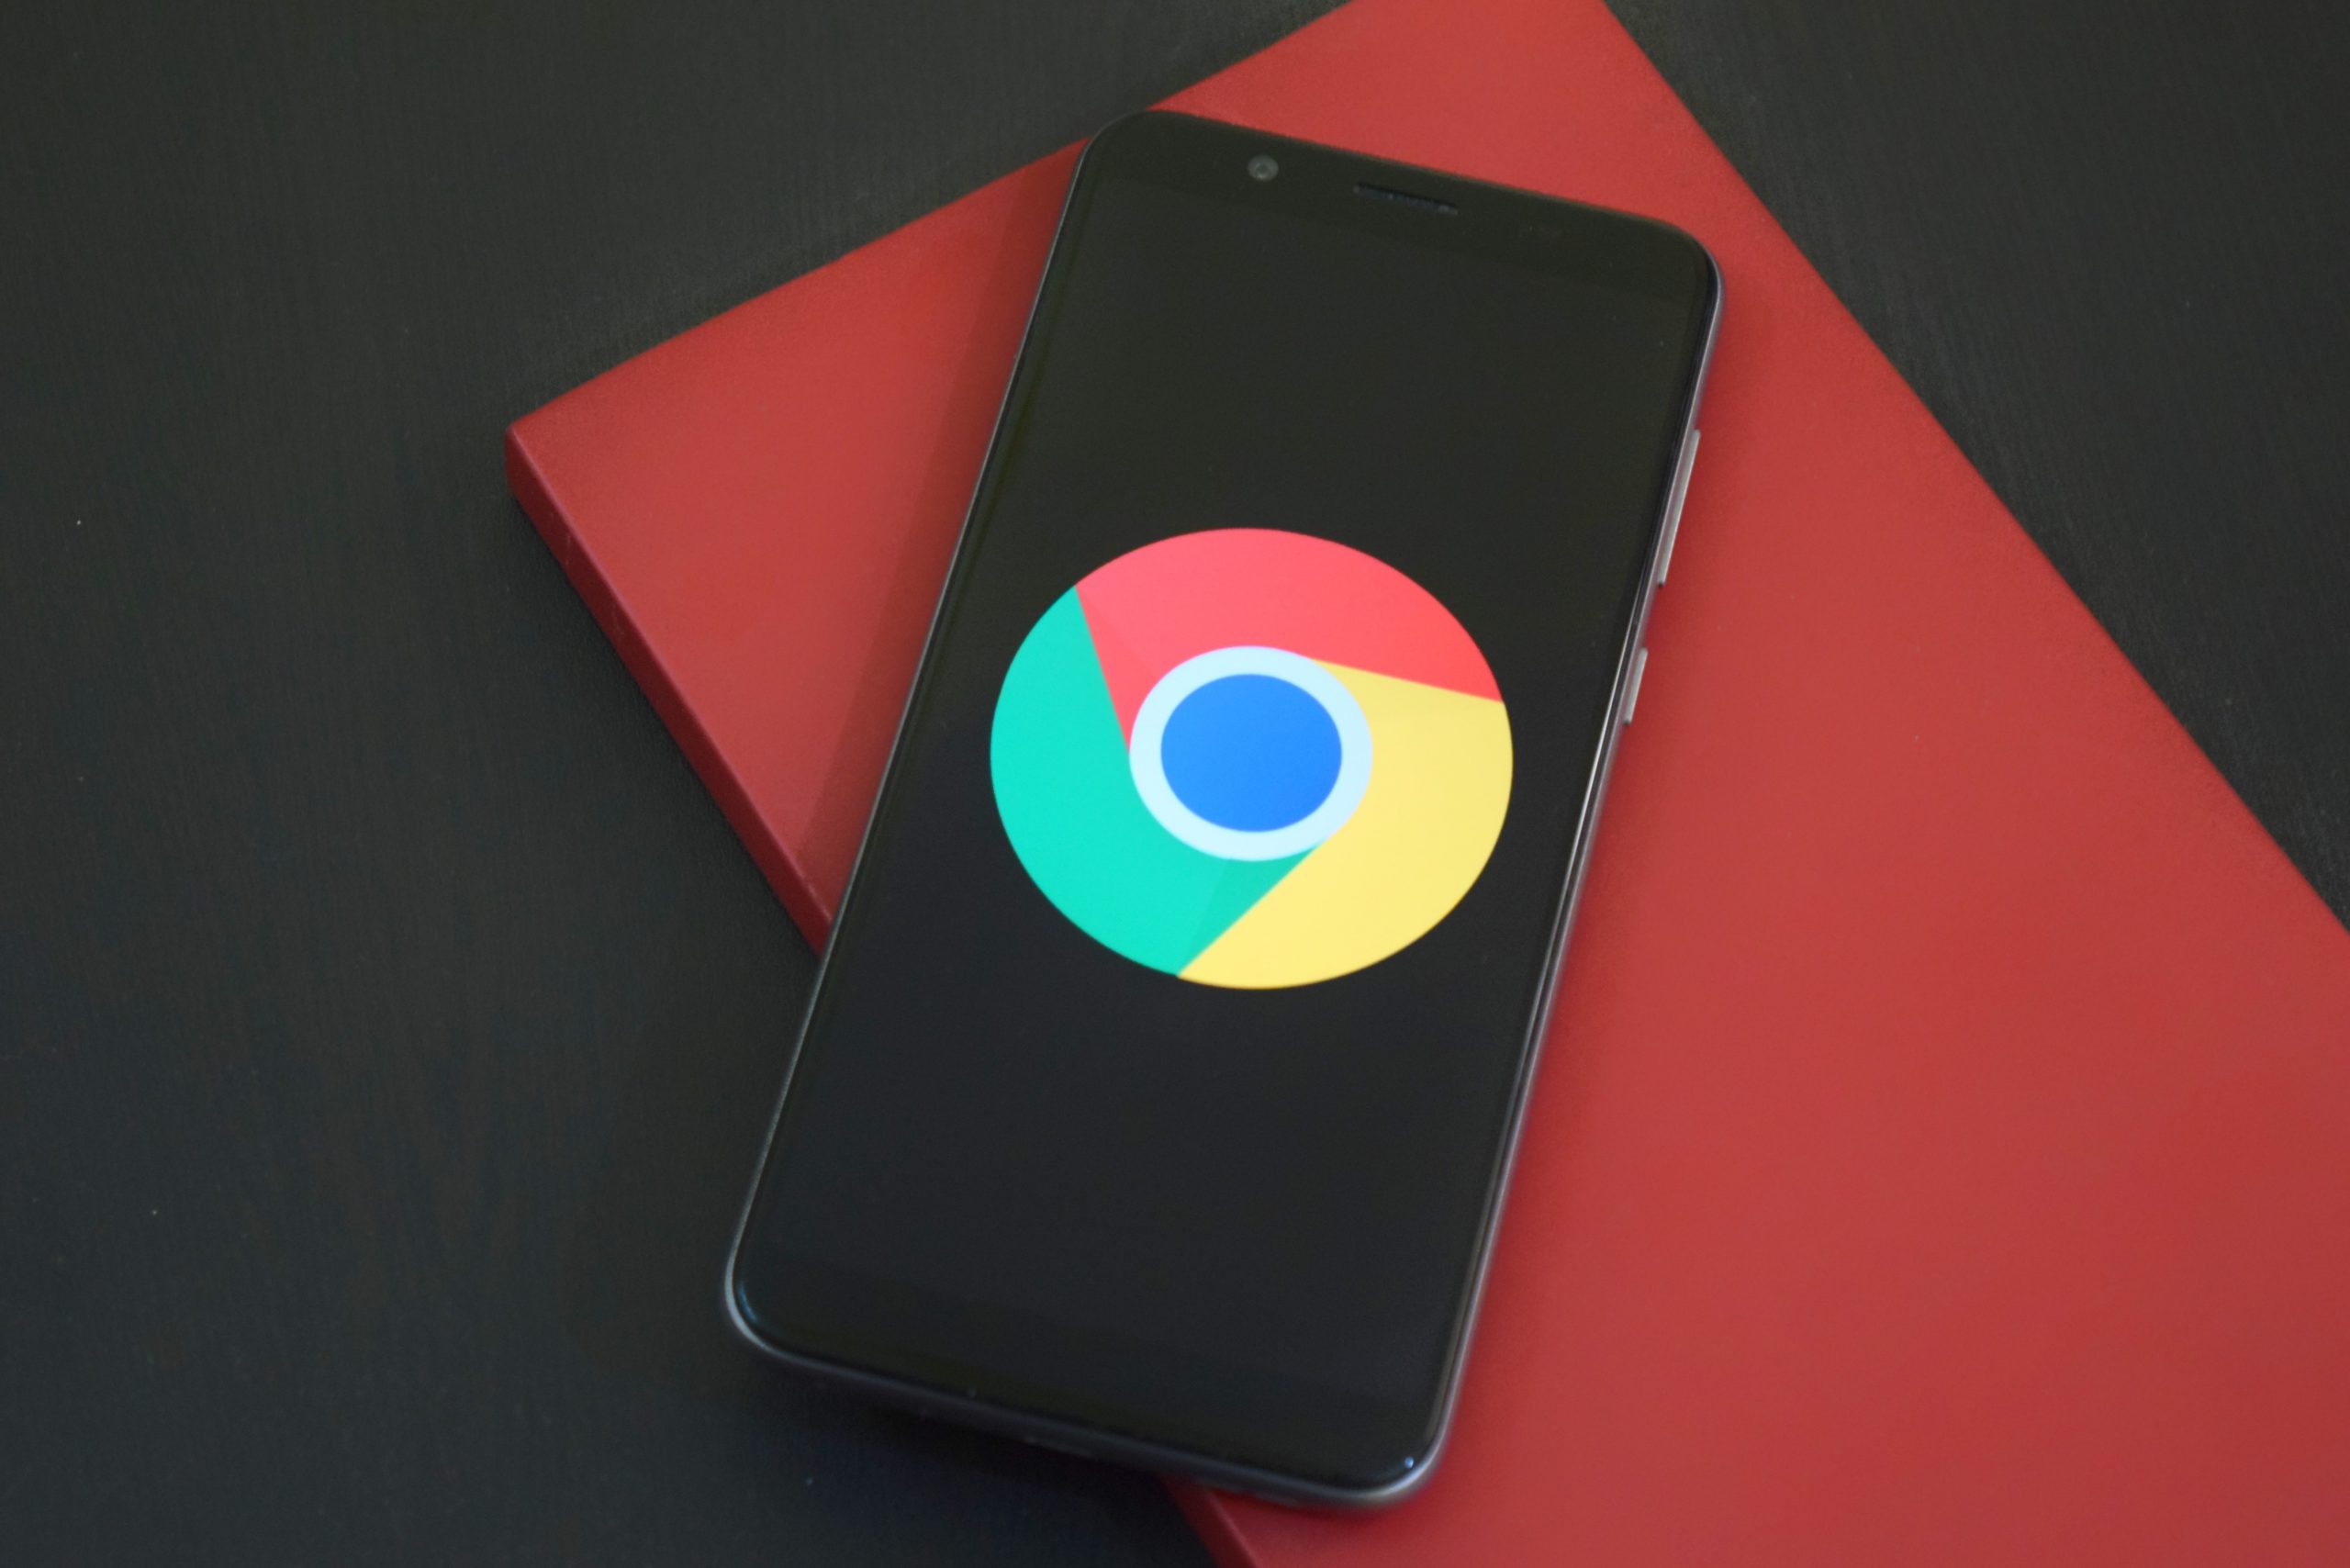 An image of a phone with the Google Chrome logo.